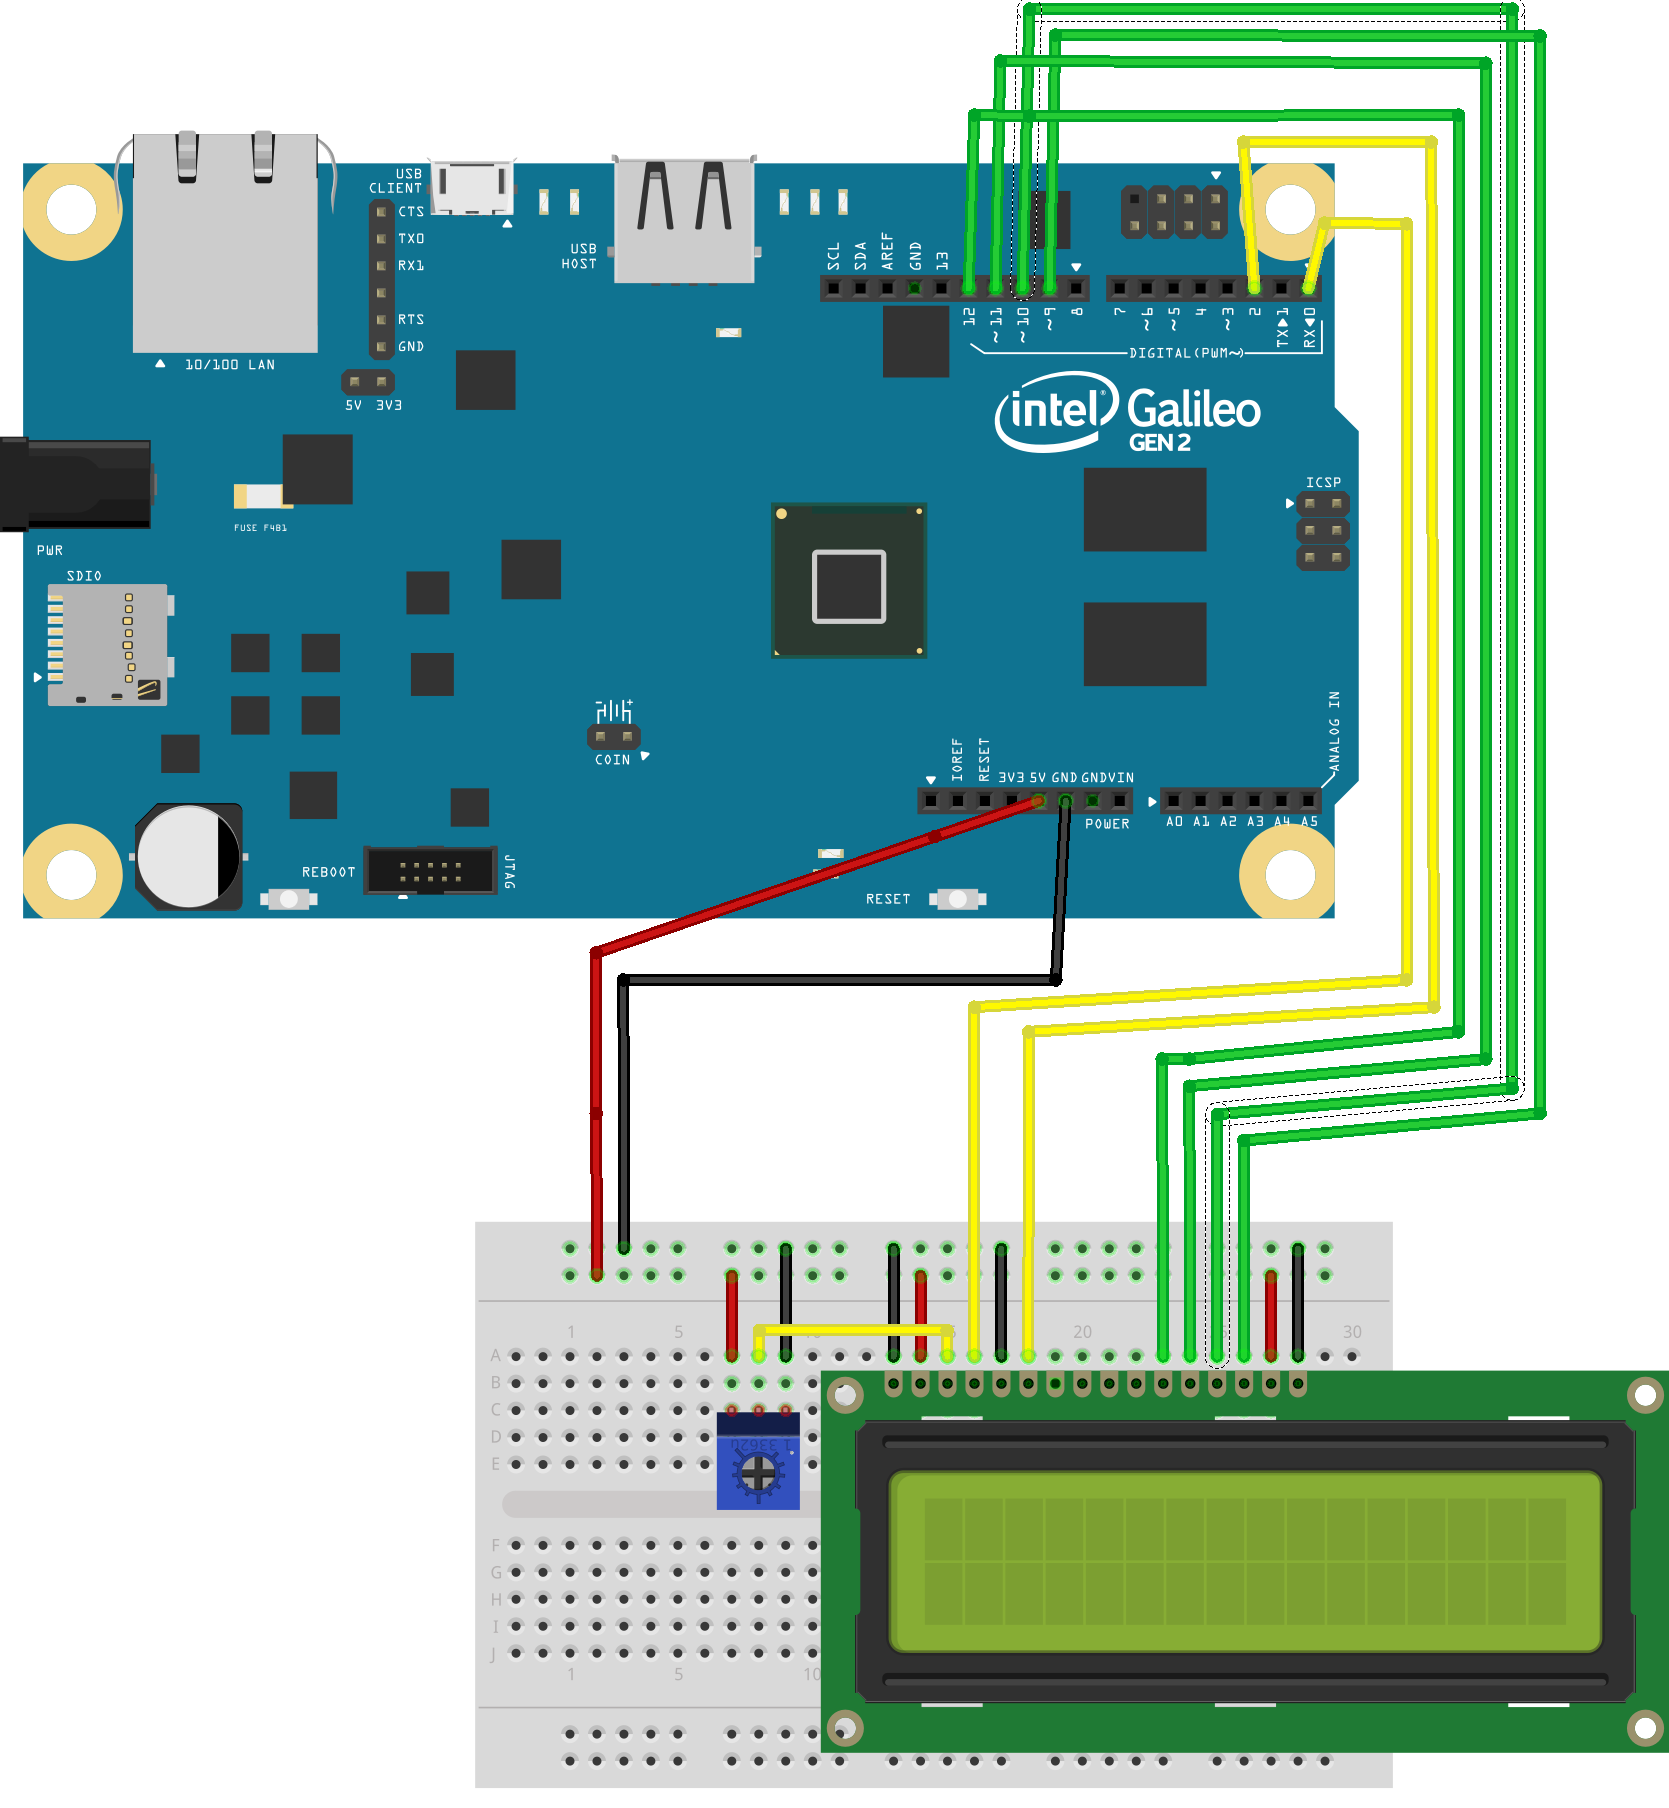 iot2016:labs:lcdgalileo1.png